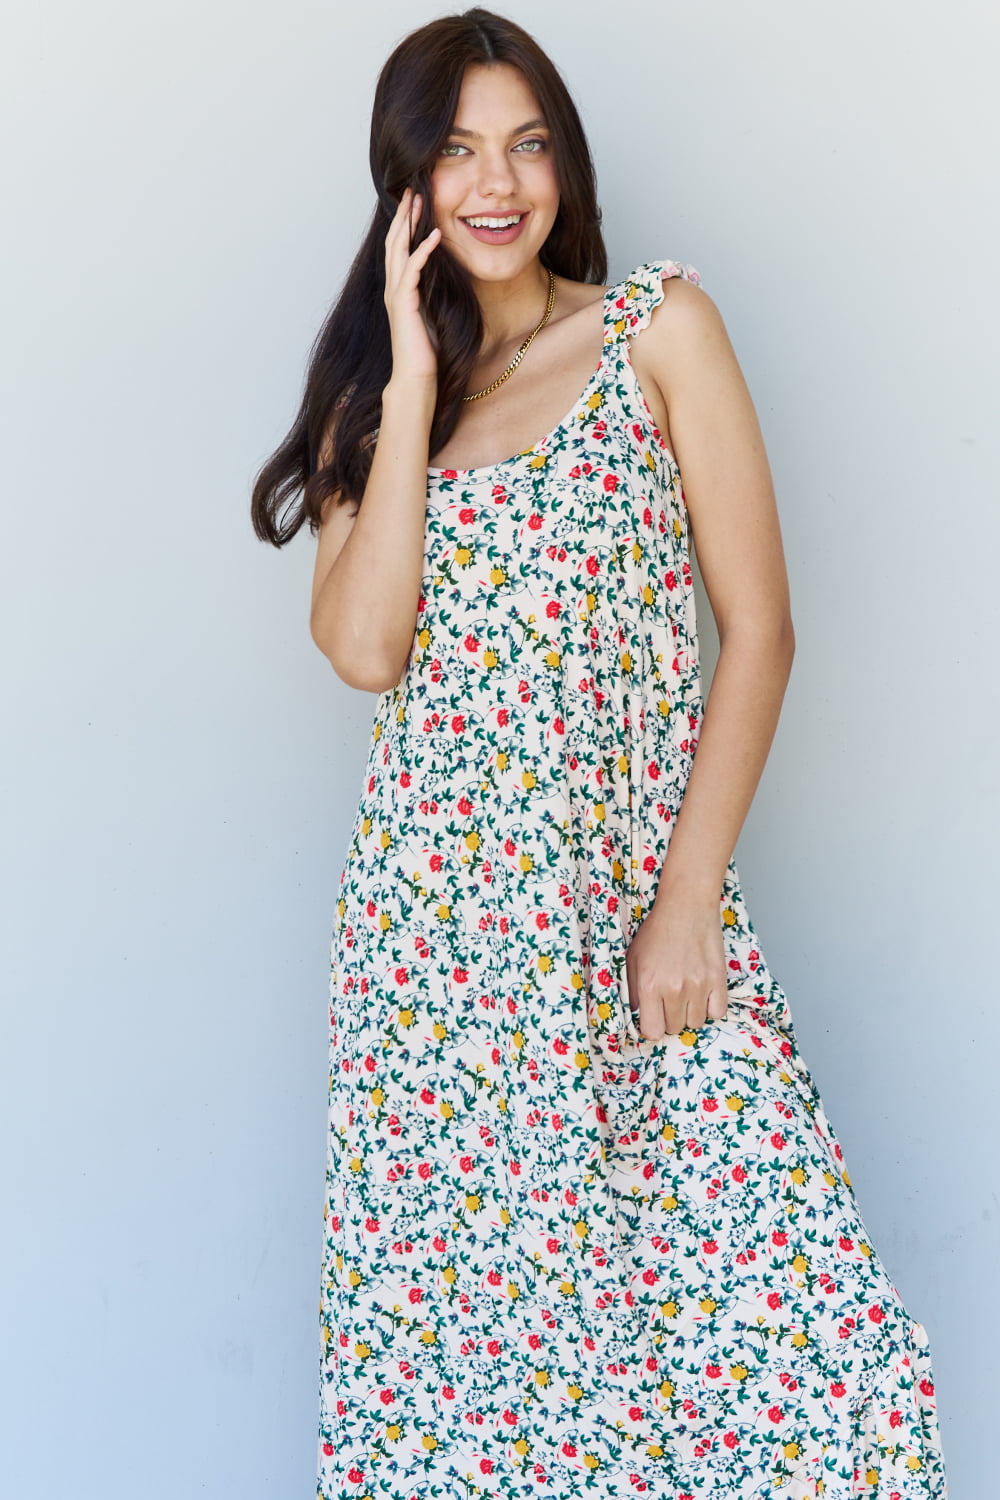 The Garden Ruffle Floral Maxi Dress in Natural Rose - All Dresses - Dresses - 5 - 2024